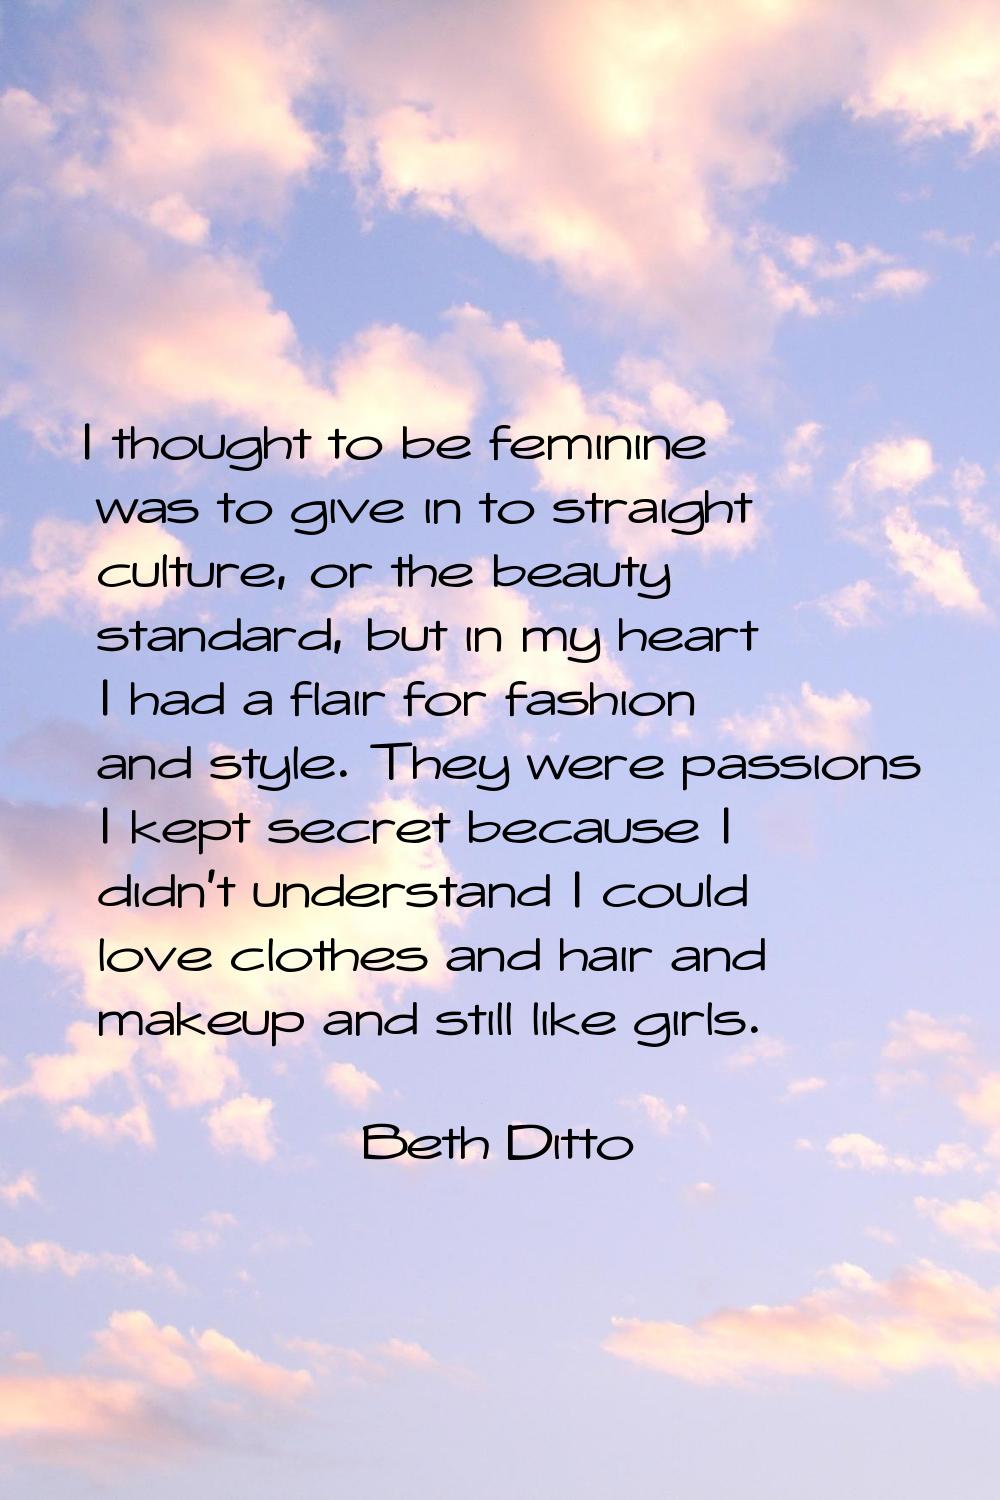 I thought to be feminine was to give in to straight culture, or the beauty standard, but in my hear